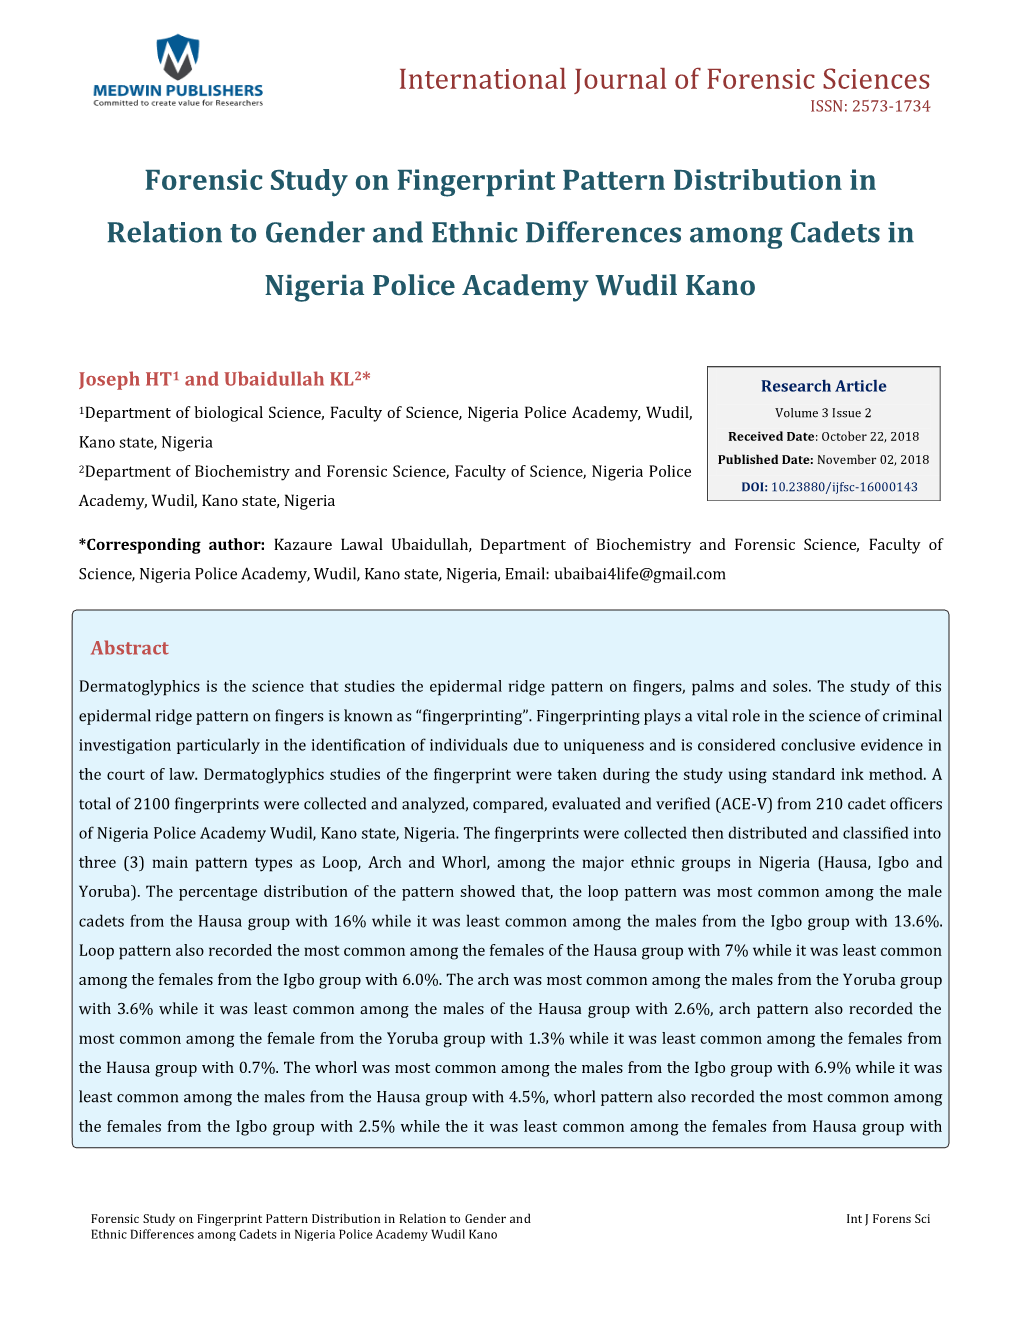 Forensic Study on Fingerprint Pattern Distribution in Relation to Gender and Ethnic Differences Among Cadets in Nigeria Police Academy Wudil Kano